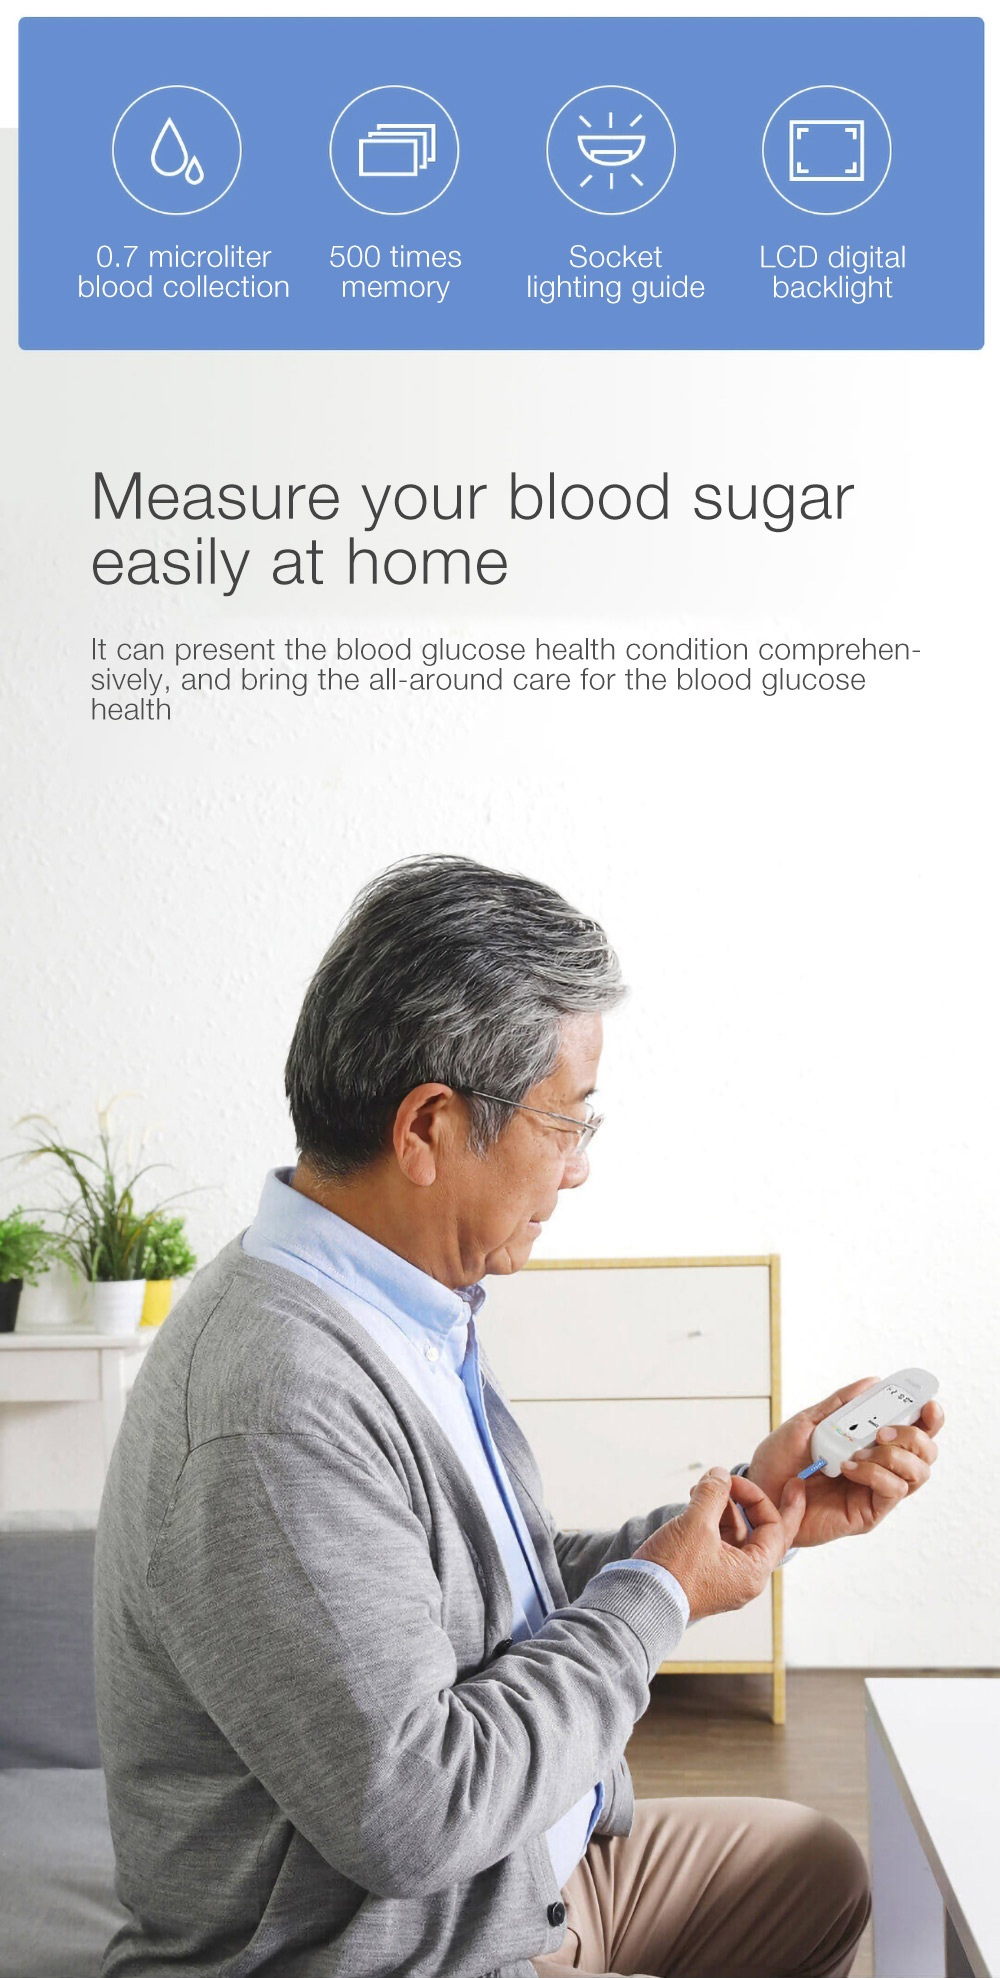 Measure your blood sugar easily at home It can present the blood glucose health condition comprehensively, and bring the all-around care for the blood glucose health